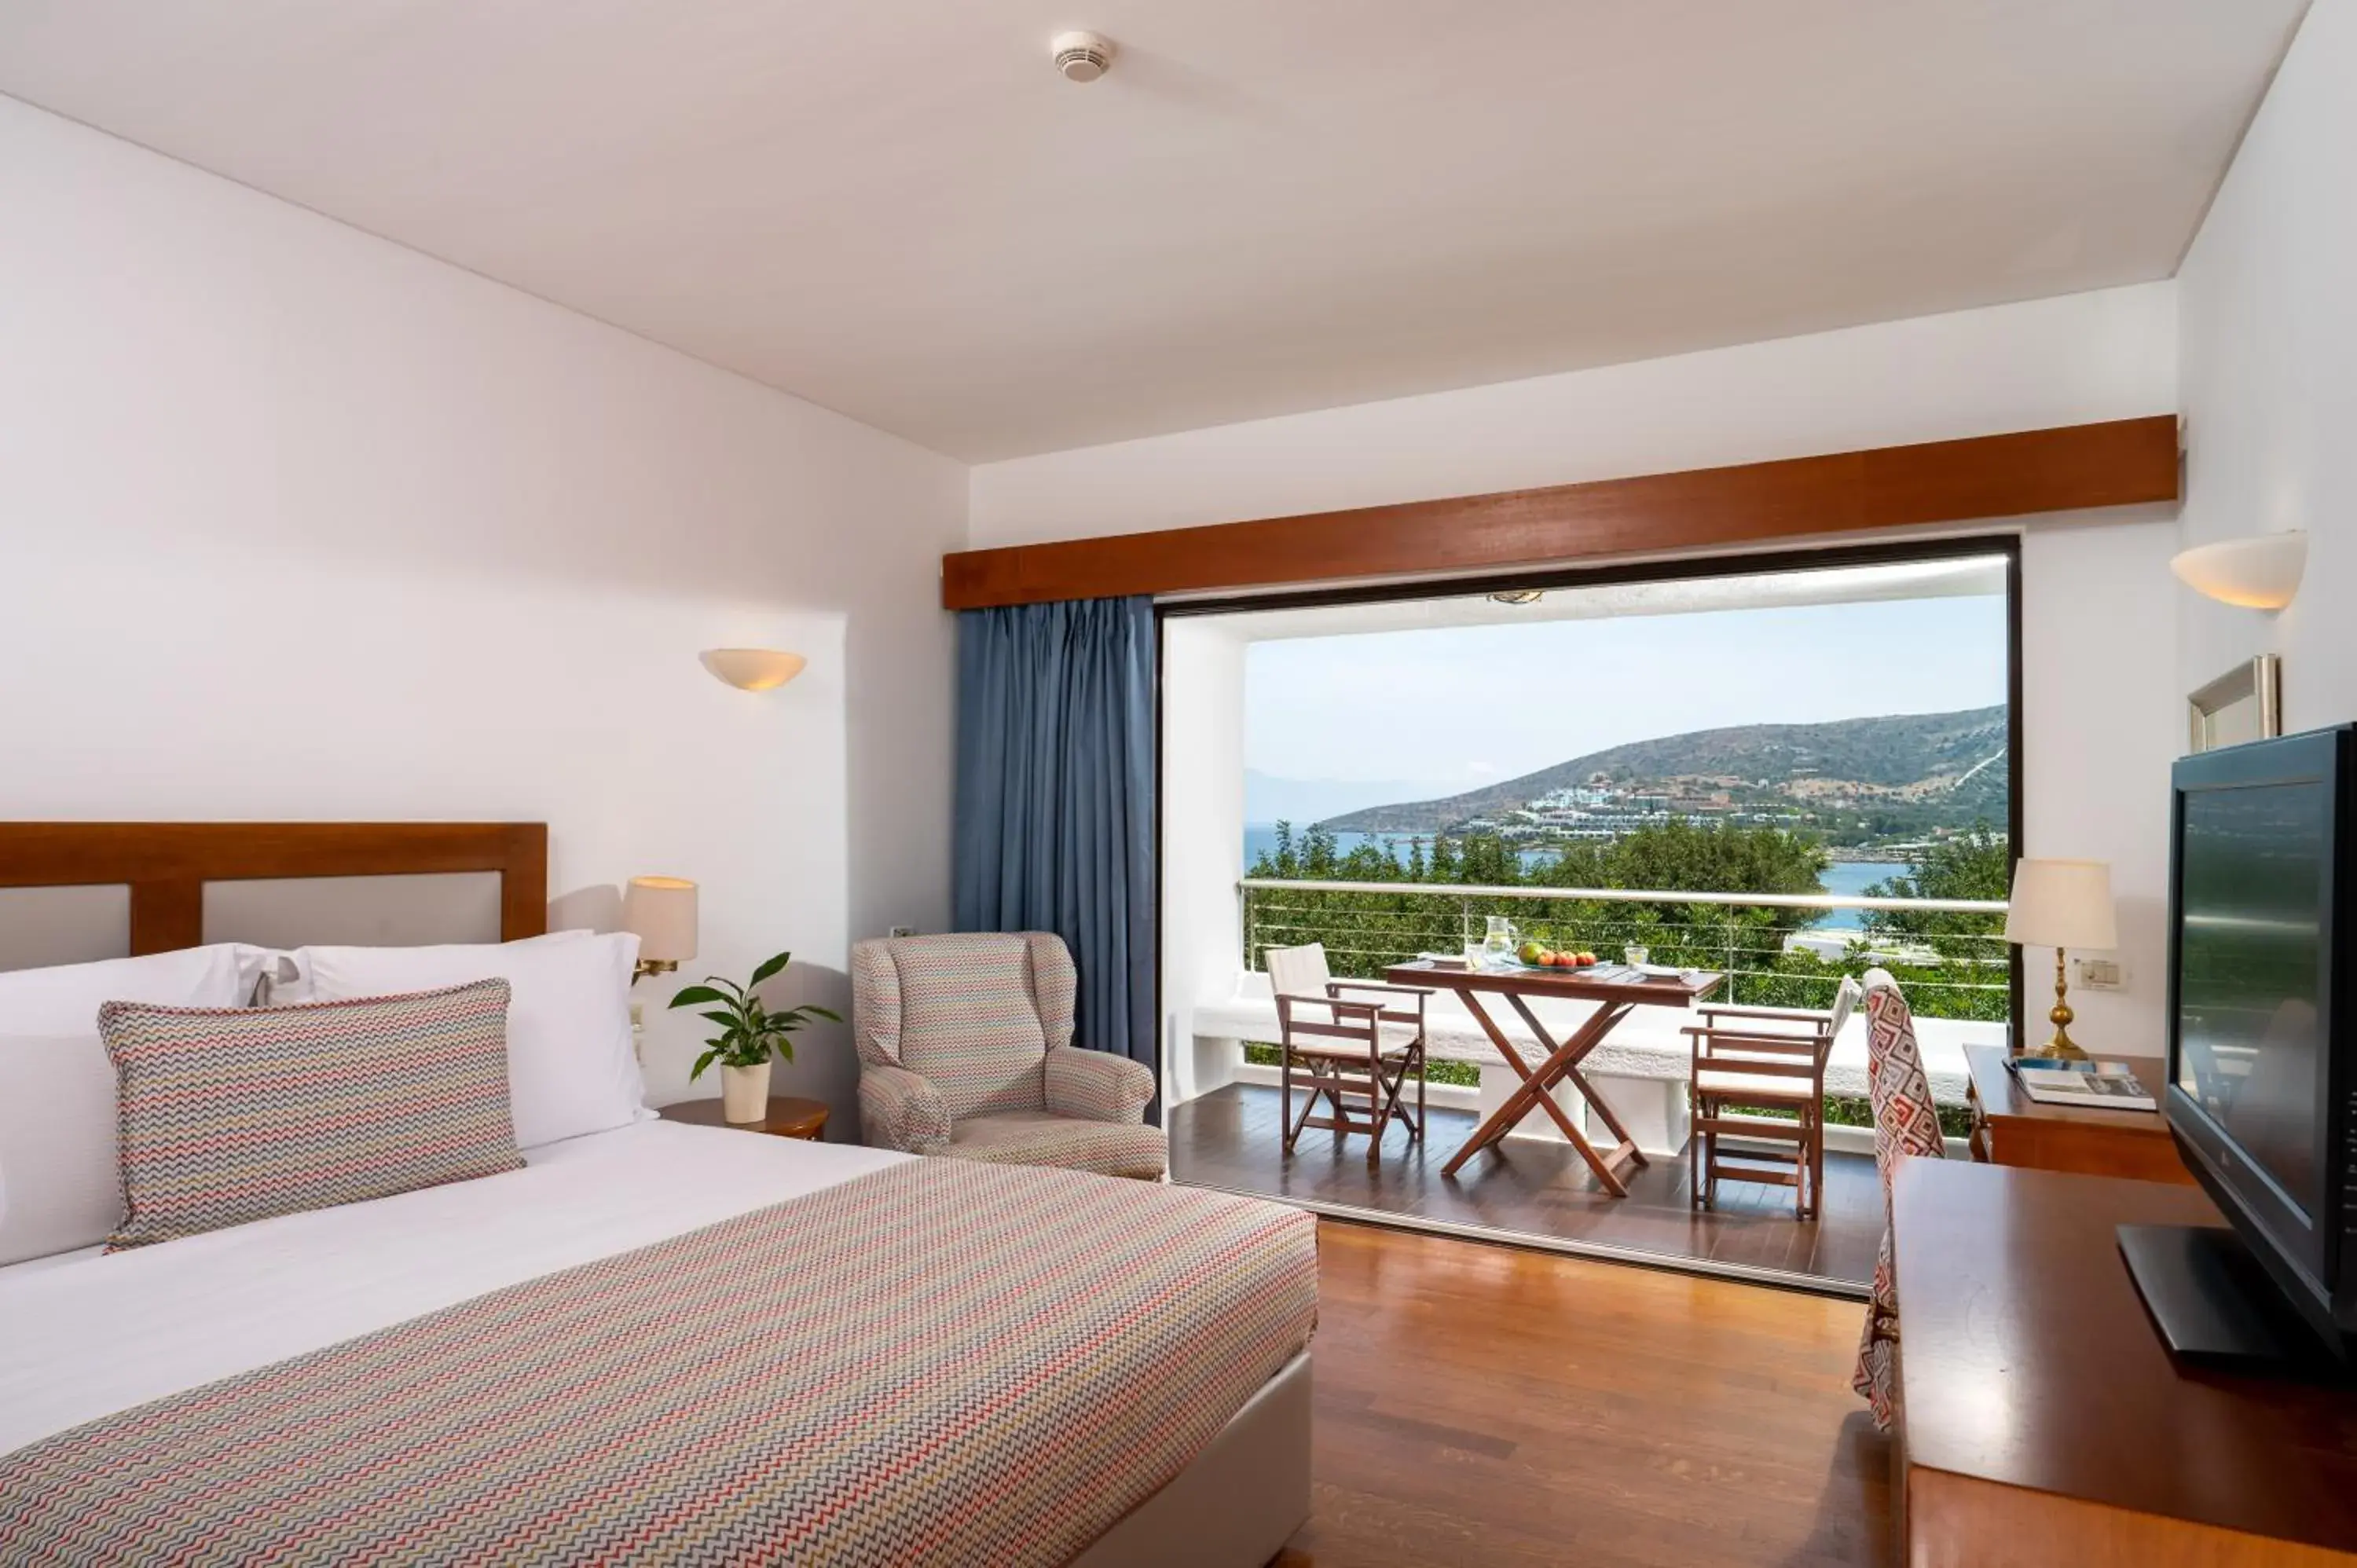 Balcony/Terrace, Mountain View in Elounda Beach Hotel & Villas, a Member of the Leading Hotels of the World